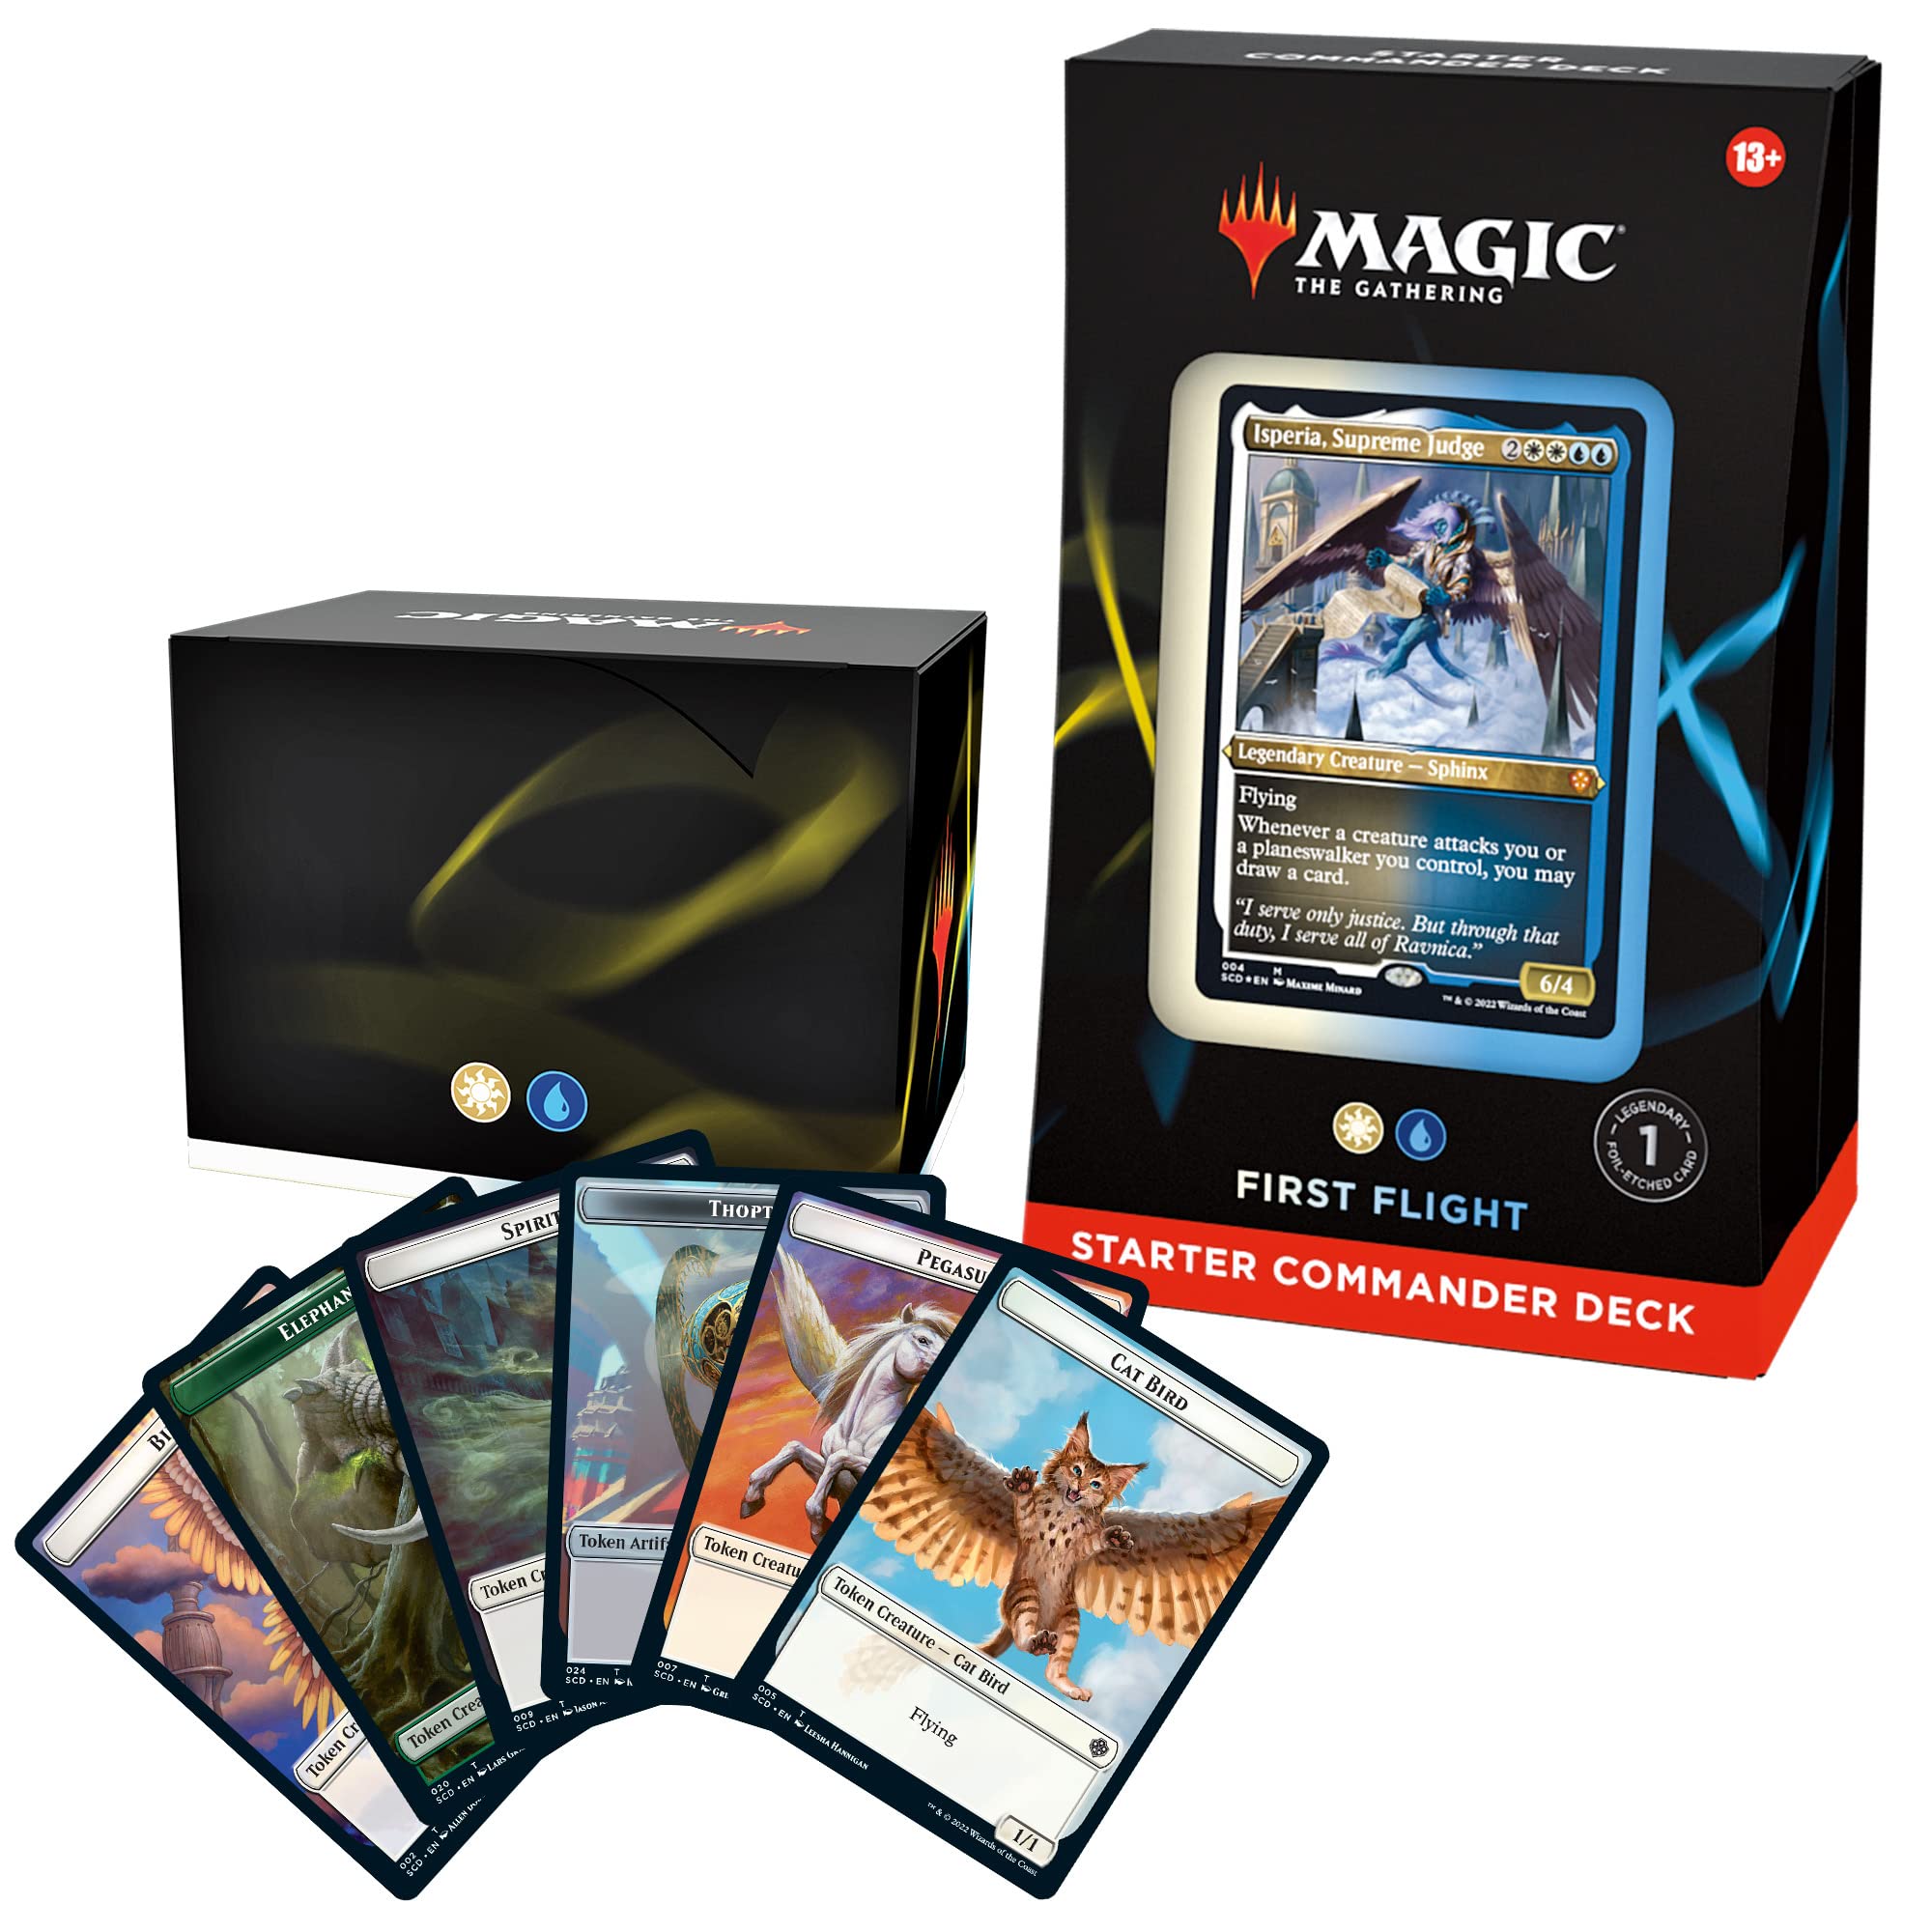 Magic The Gathering Magic: The Gathering Starter Commander Deck - First Flight (White-Blue)